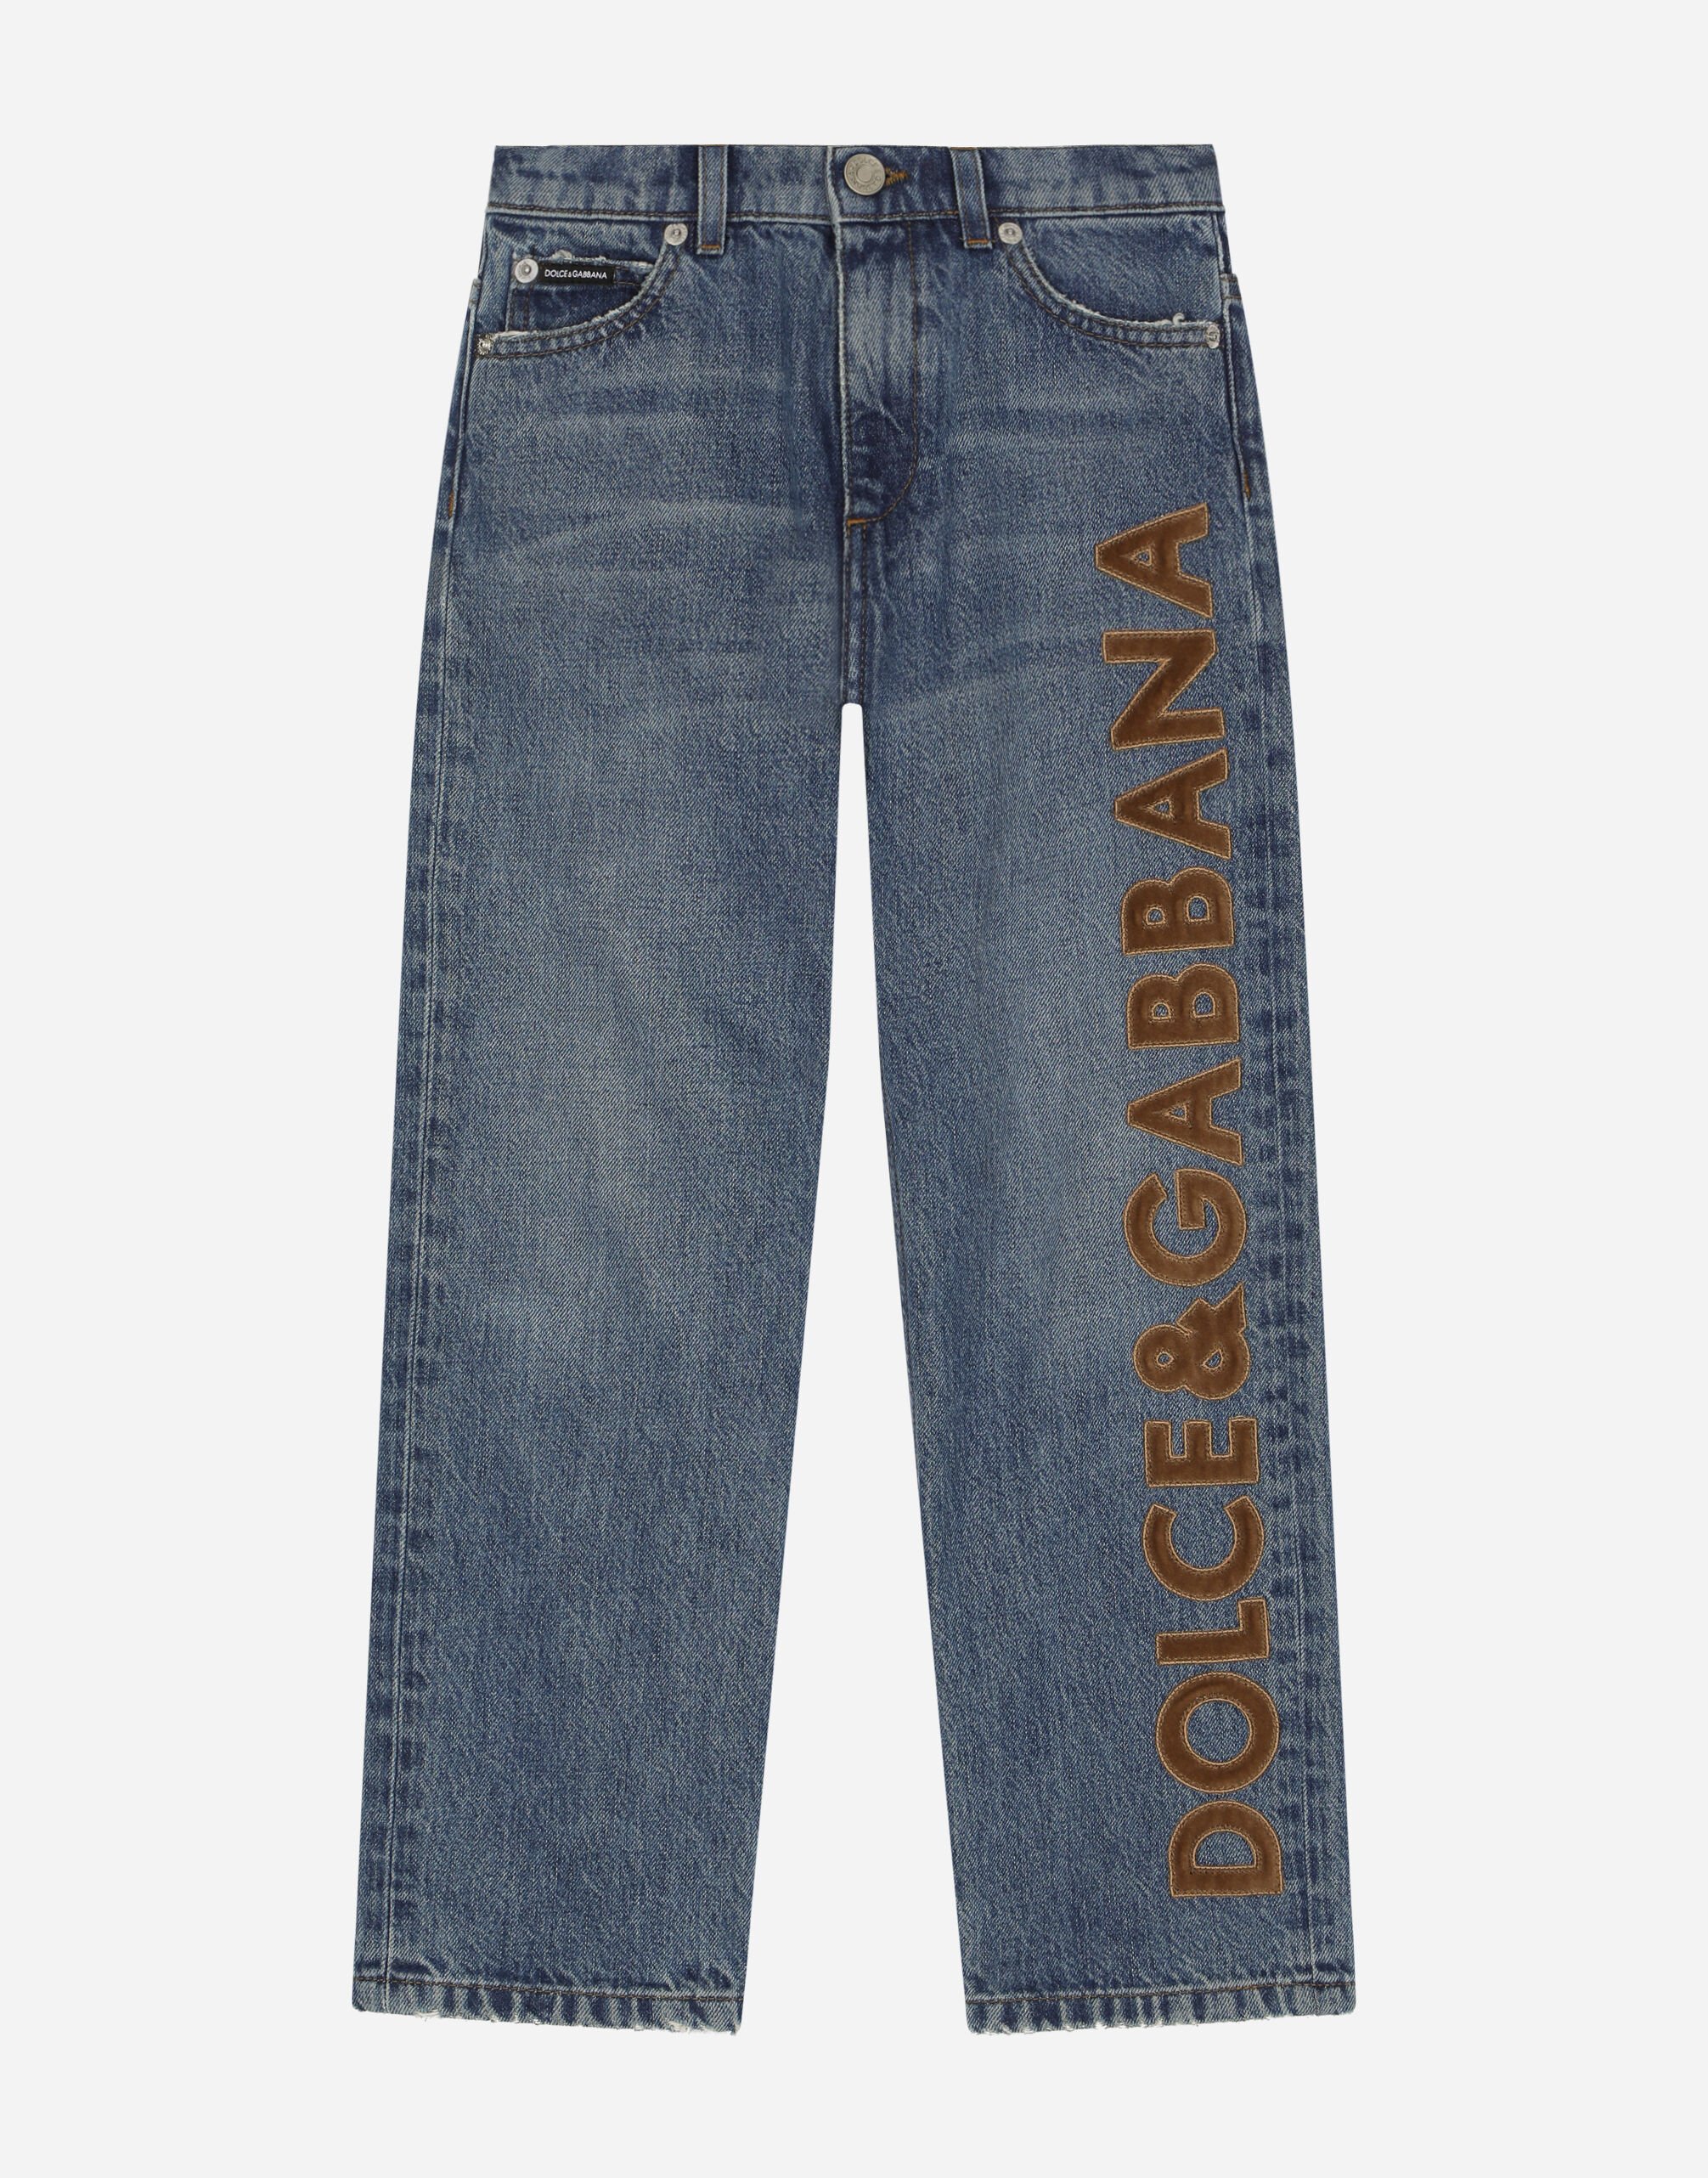 Dolce&Gabbana 5-pocket treated denim jeans with logo appliqué and the logo tag Multicolor L44P32HJMPB